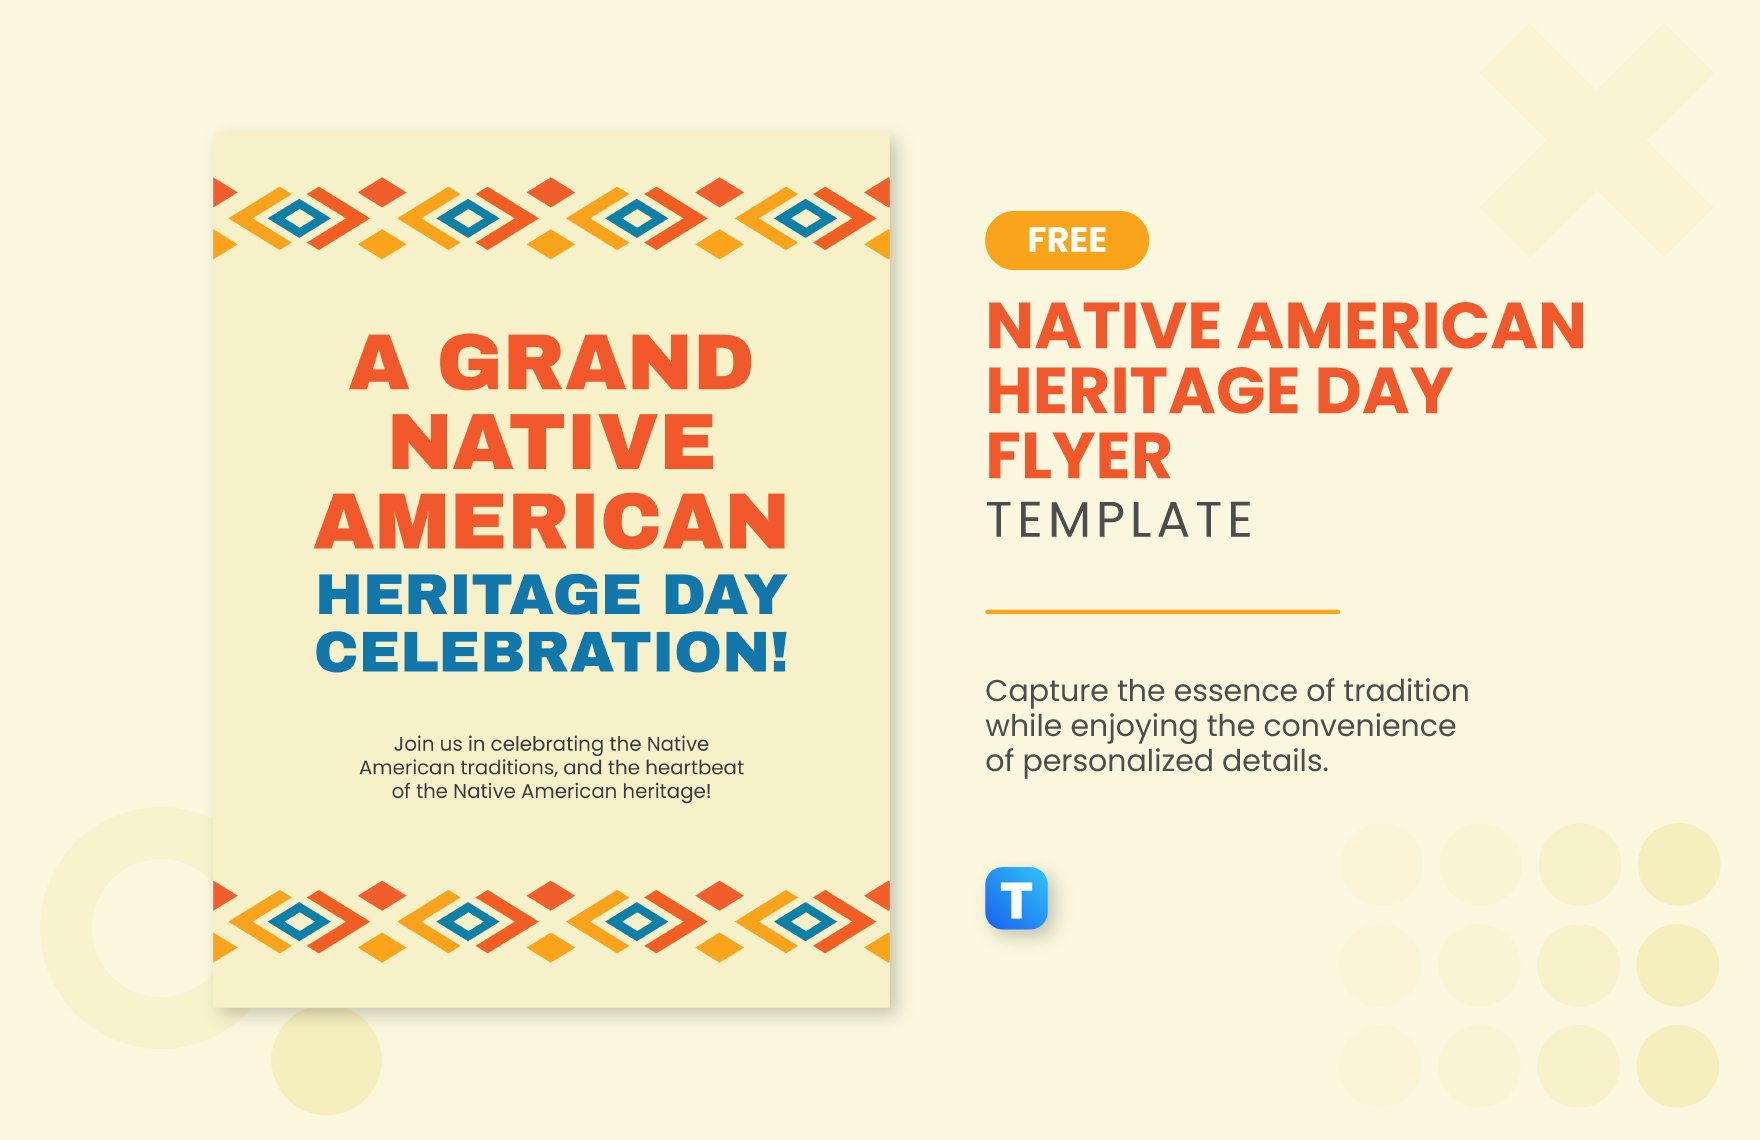 Free Native American Heritage Day Flyer Template